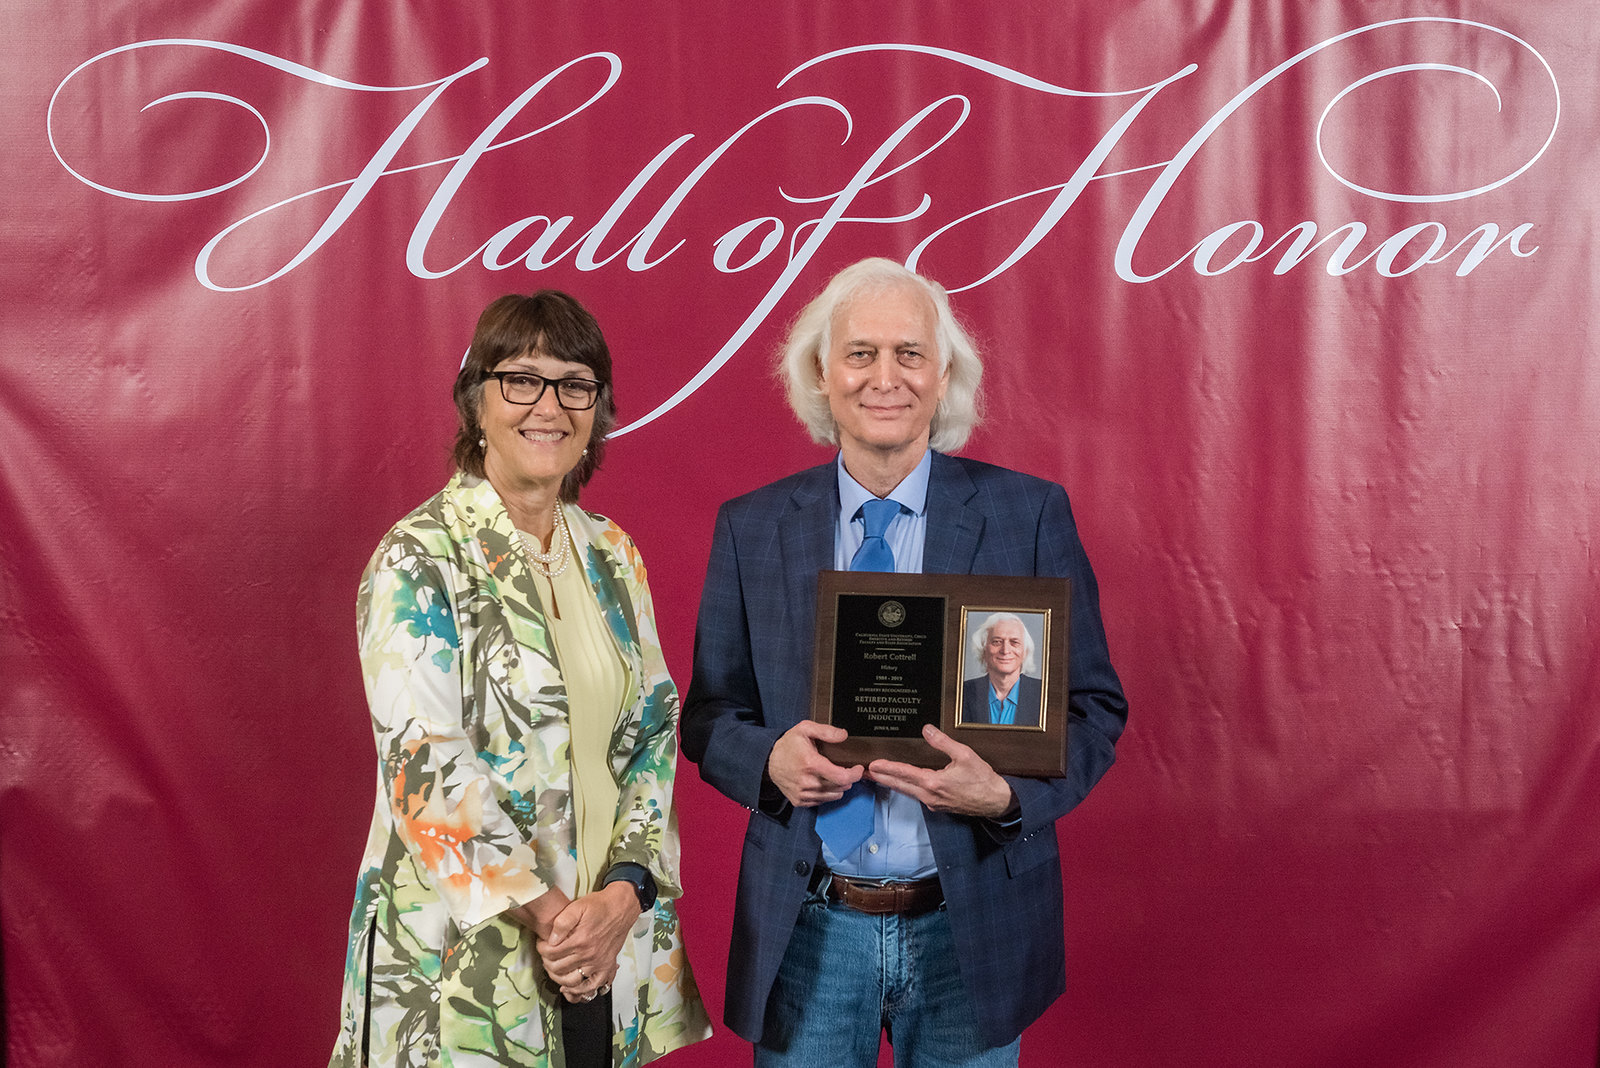 President Gayle Hutchinson with Bob Cottrell at Hall of Honor